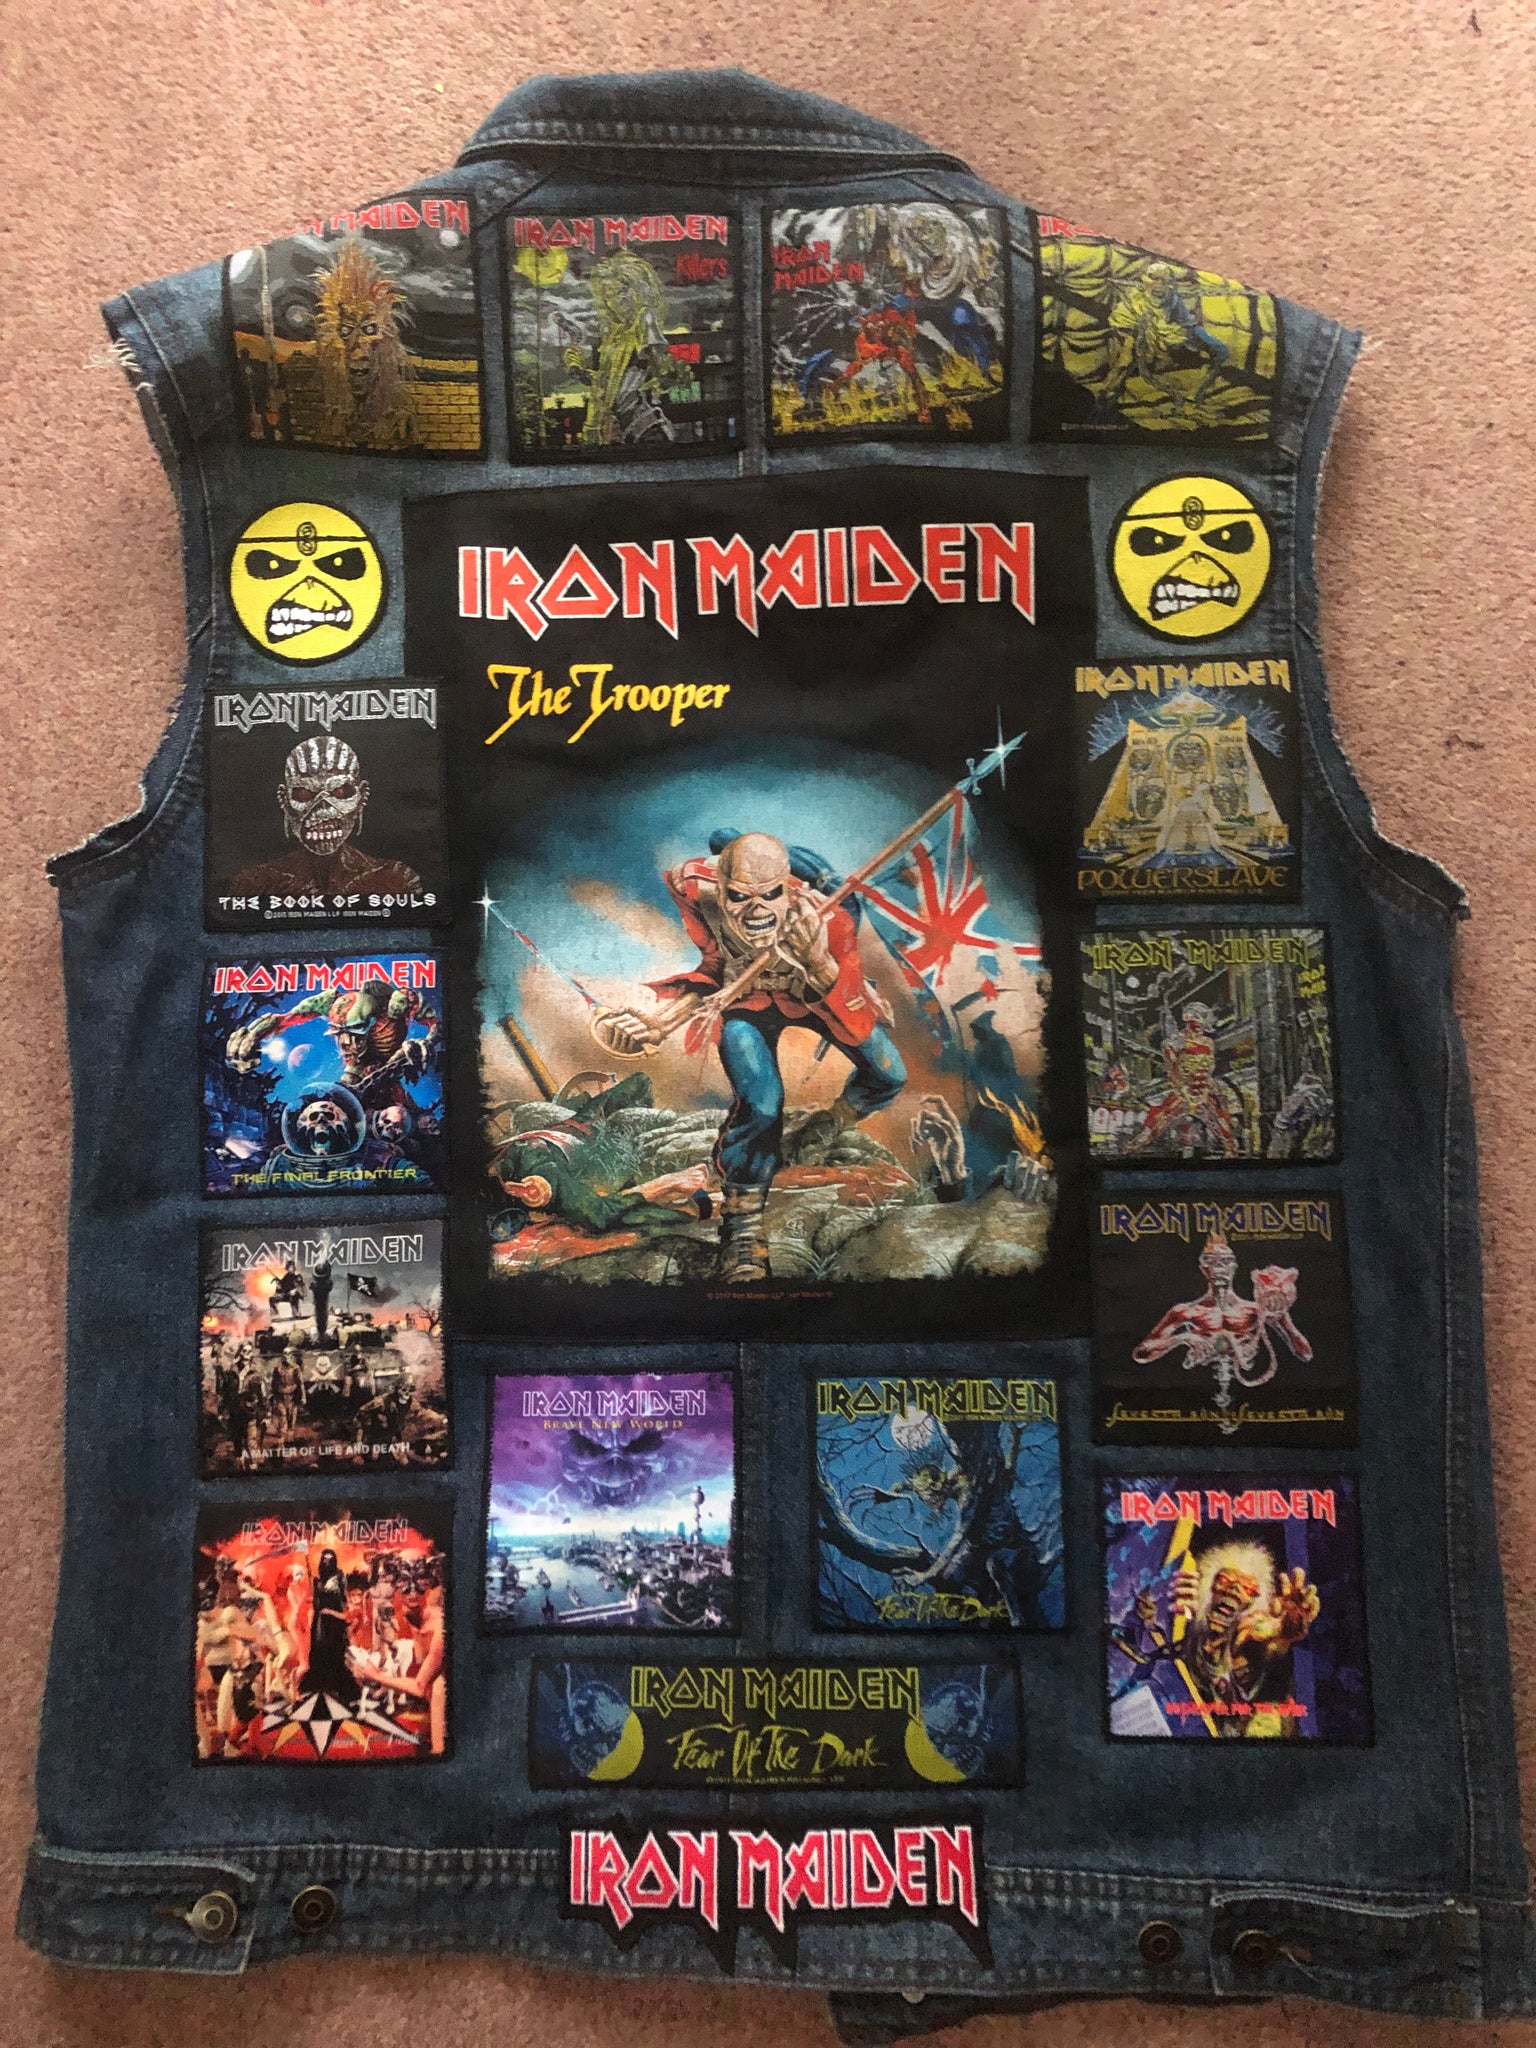 The first time iron patches on fake leather, it is successful! :  r/BattleJackets